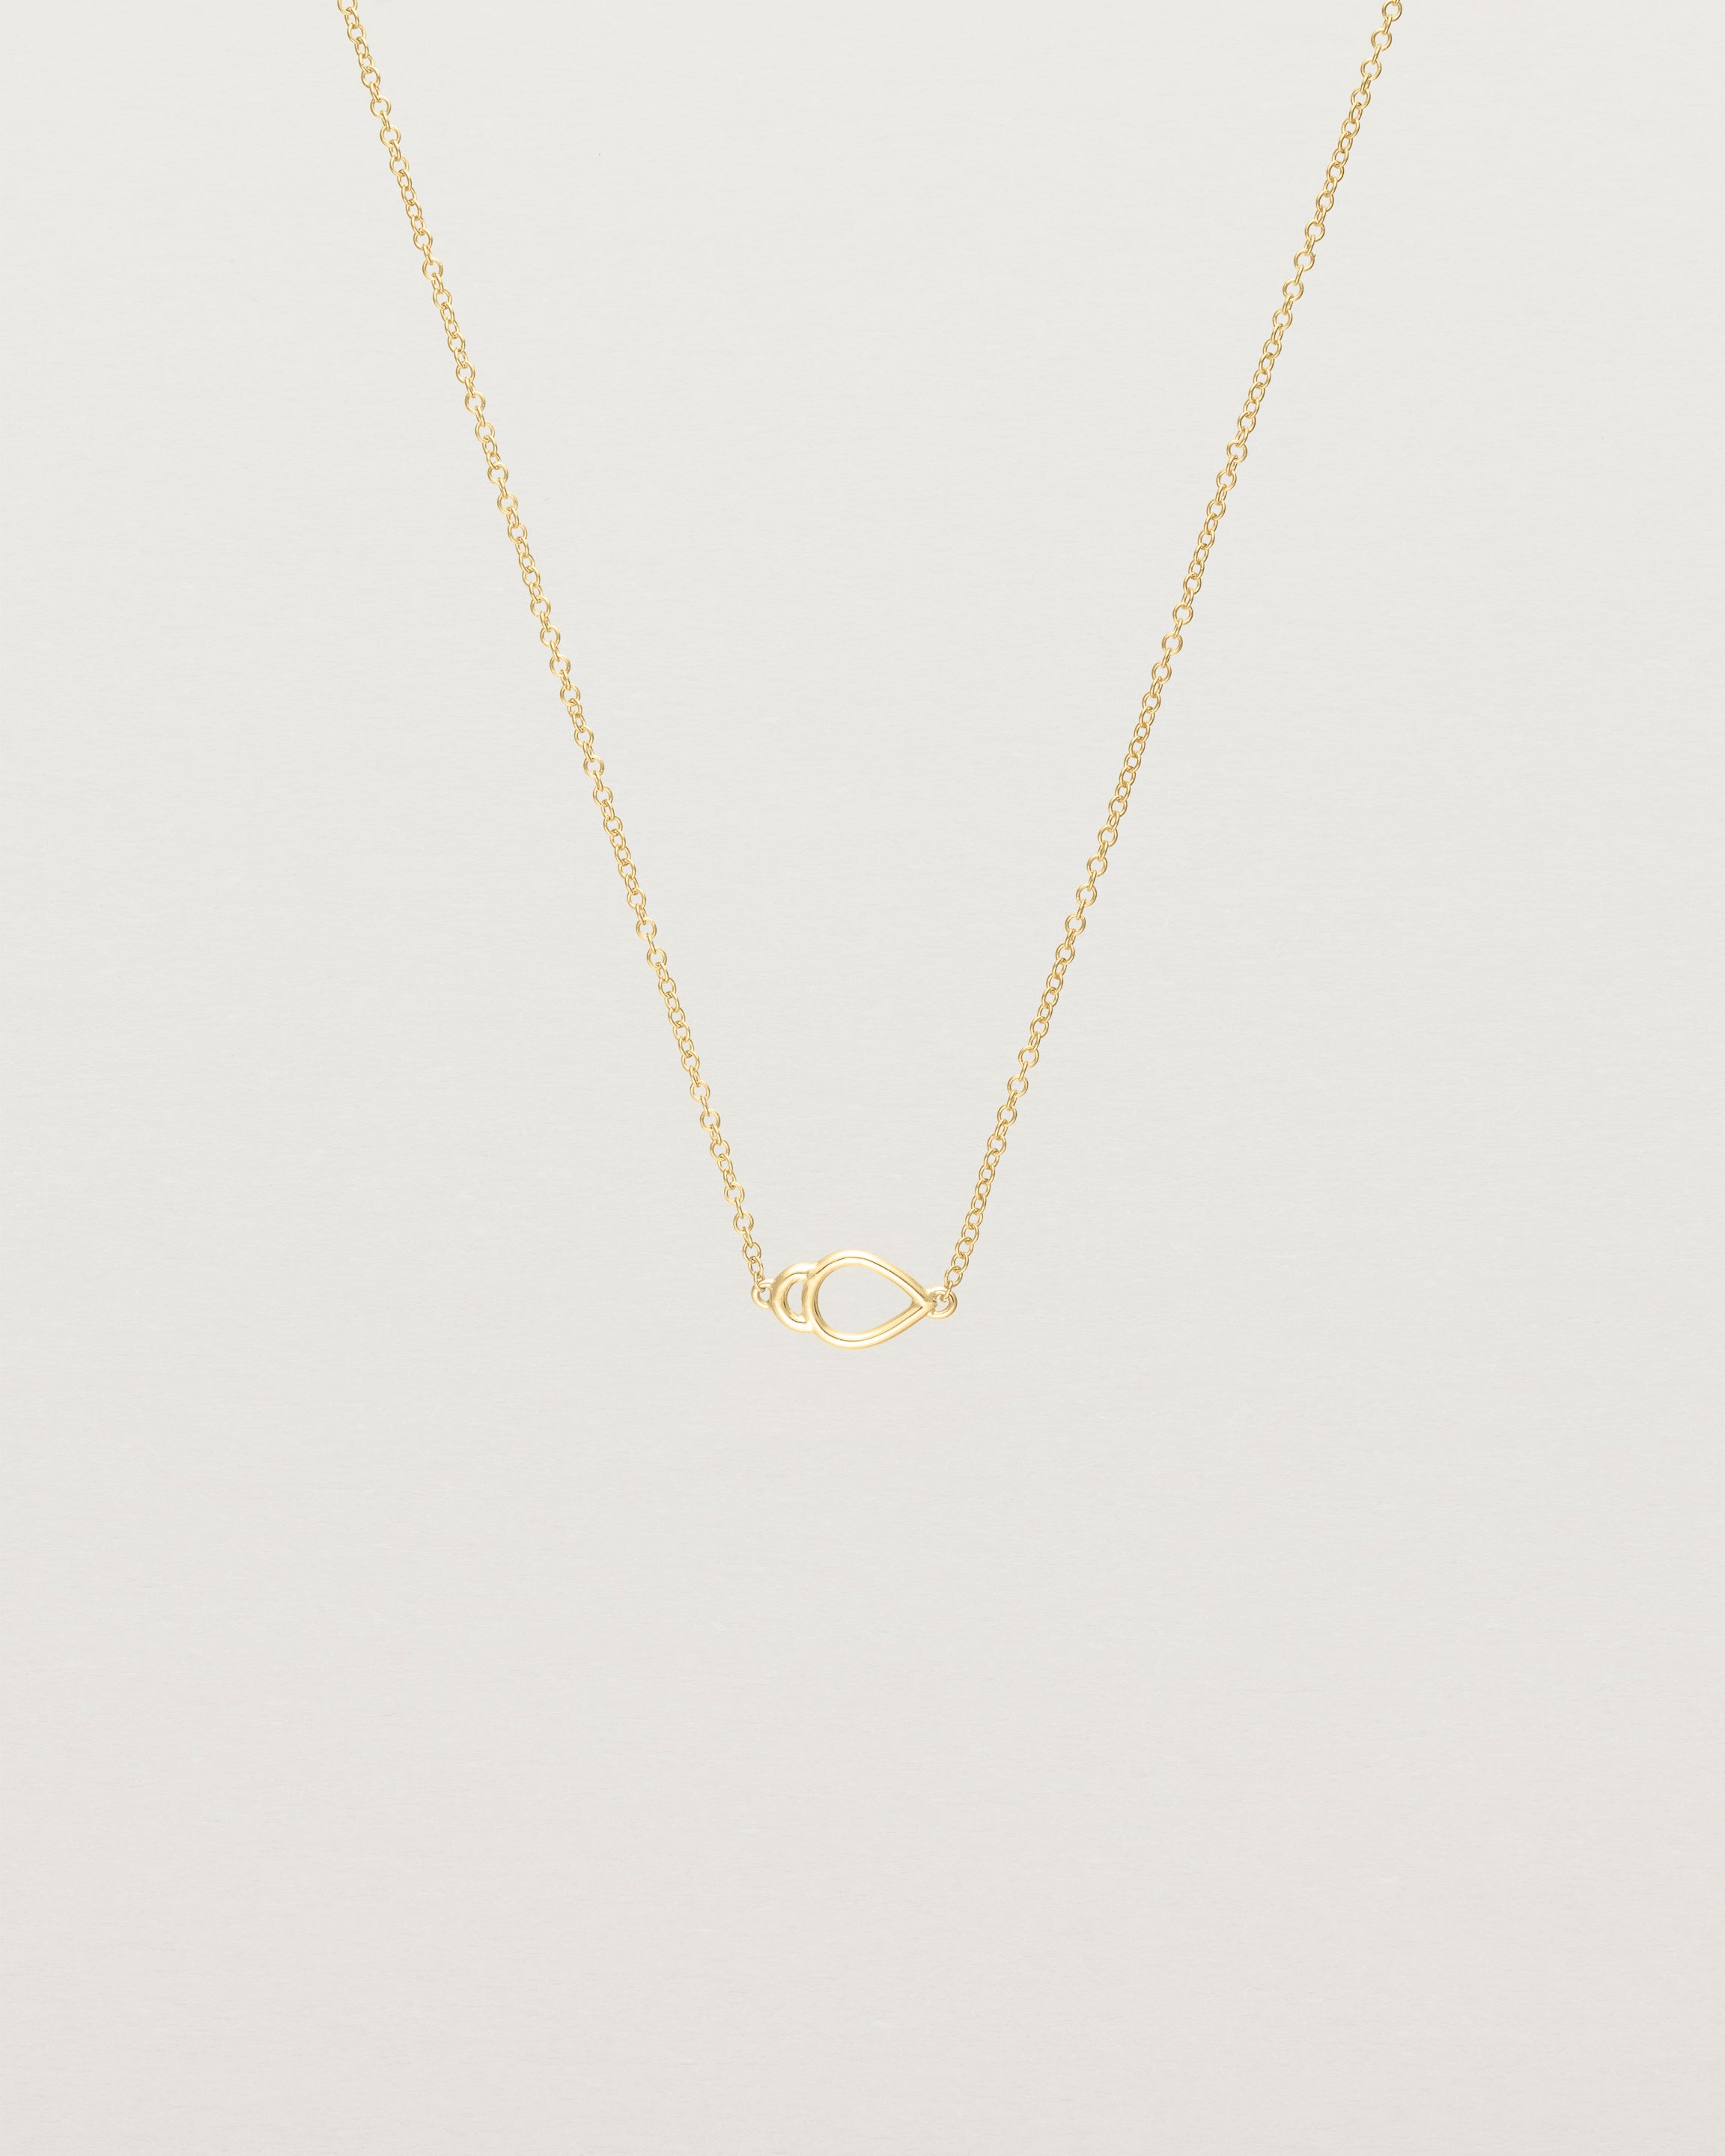 Front view of  the Oana Necklace in Yellow Gold.